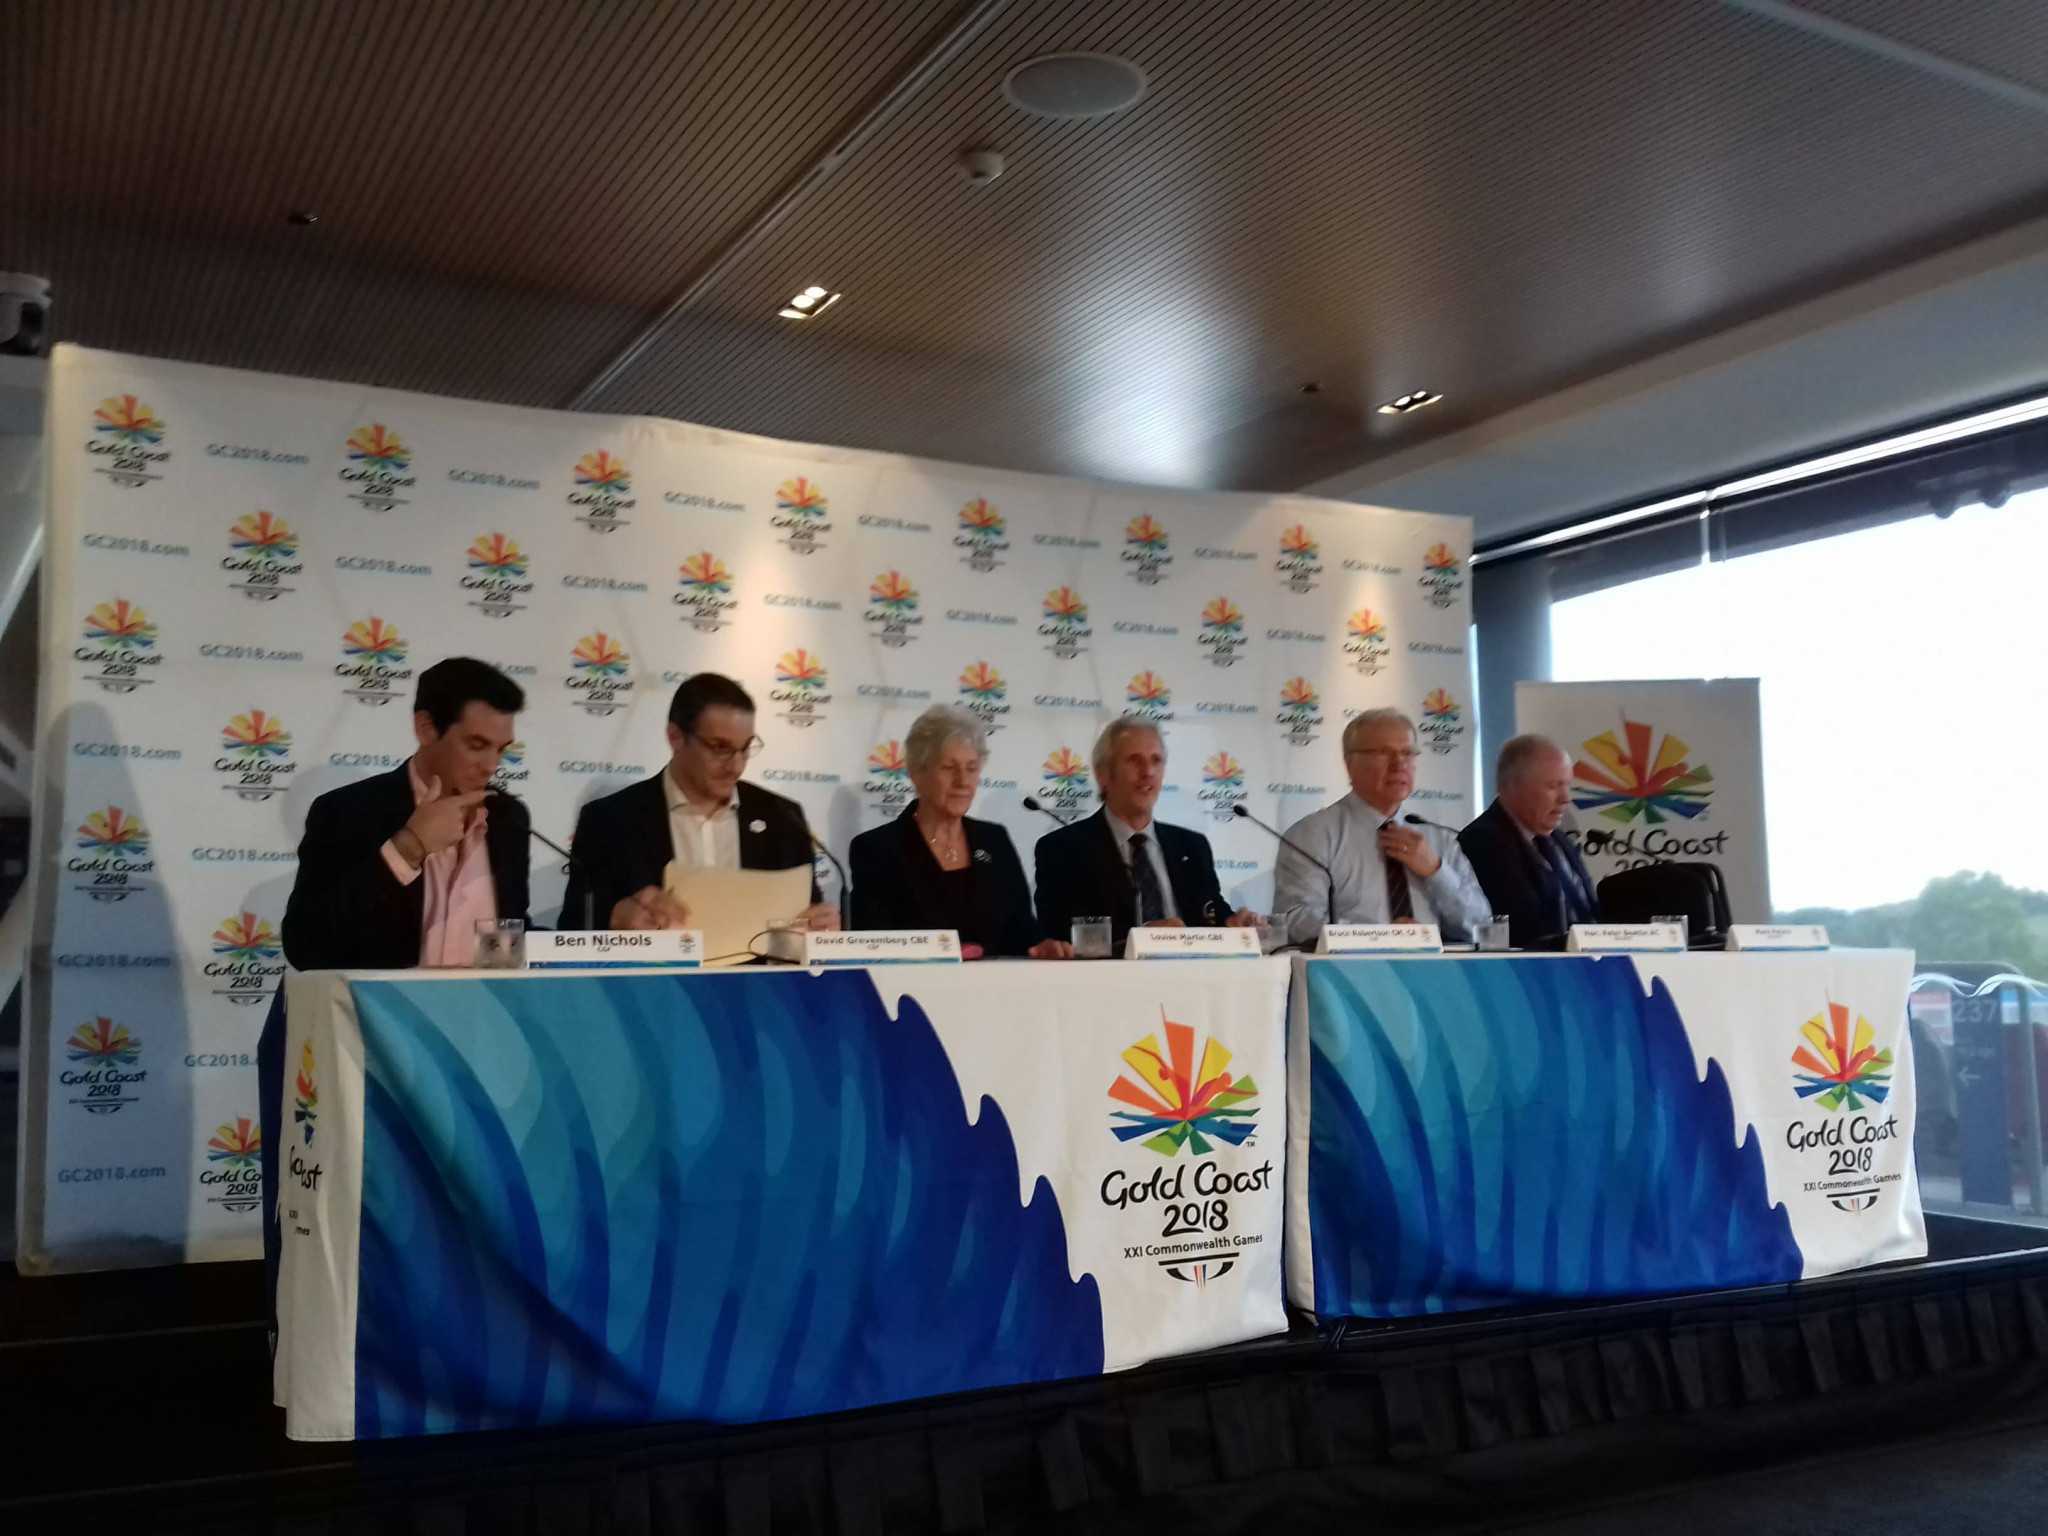 CGF officials expressed their confidence that Gold Coast would host an excellent Games next year ©ITG